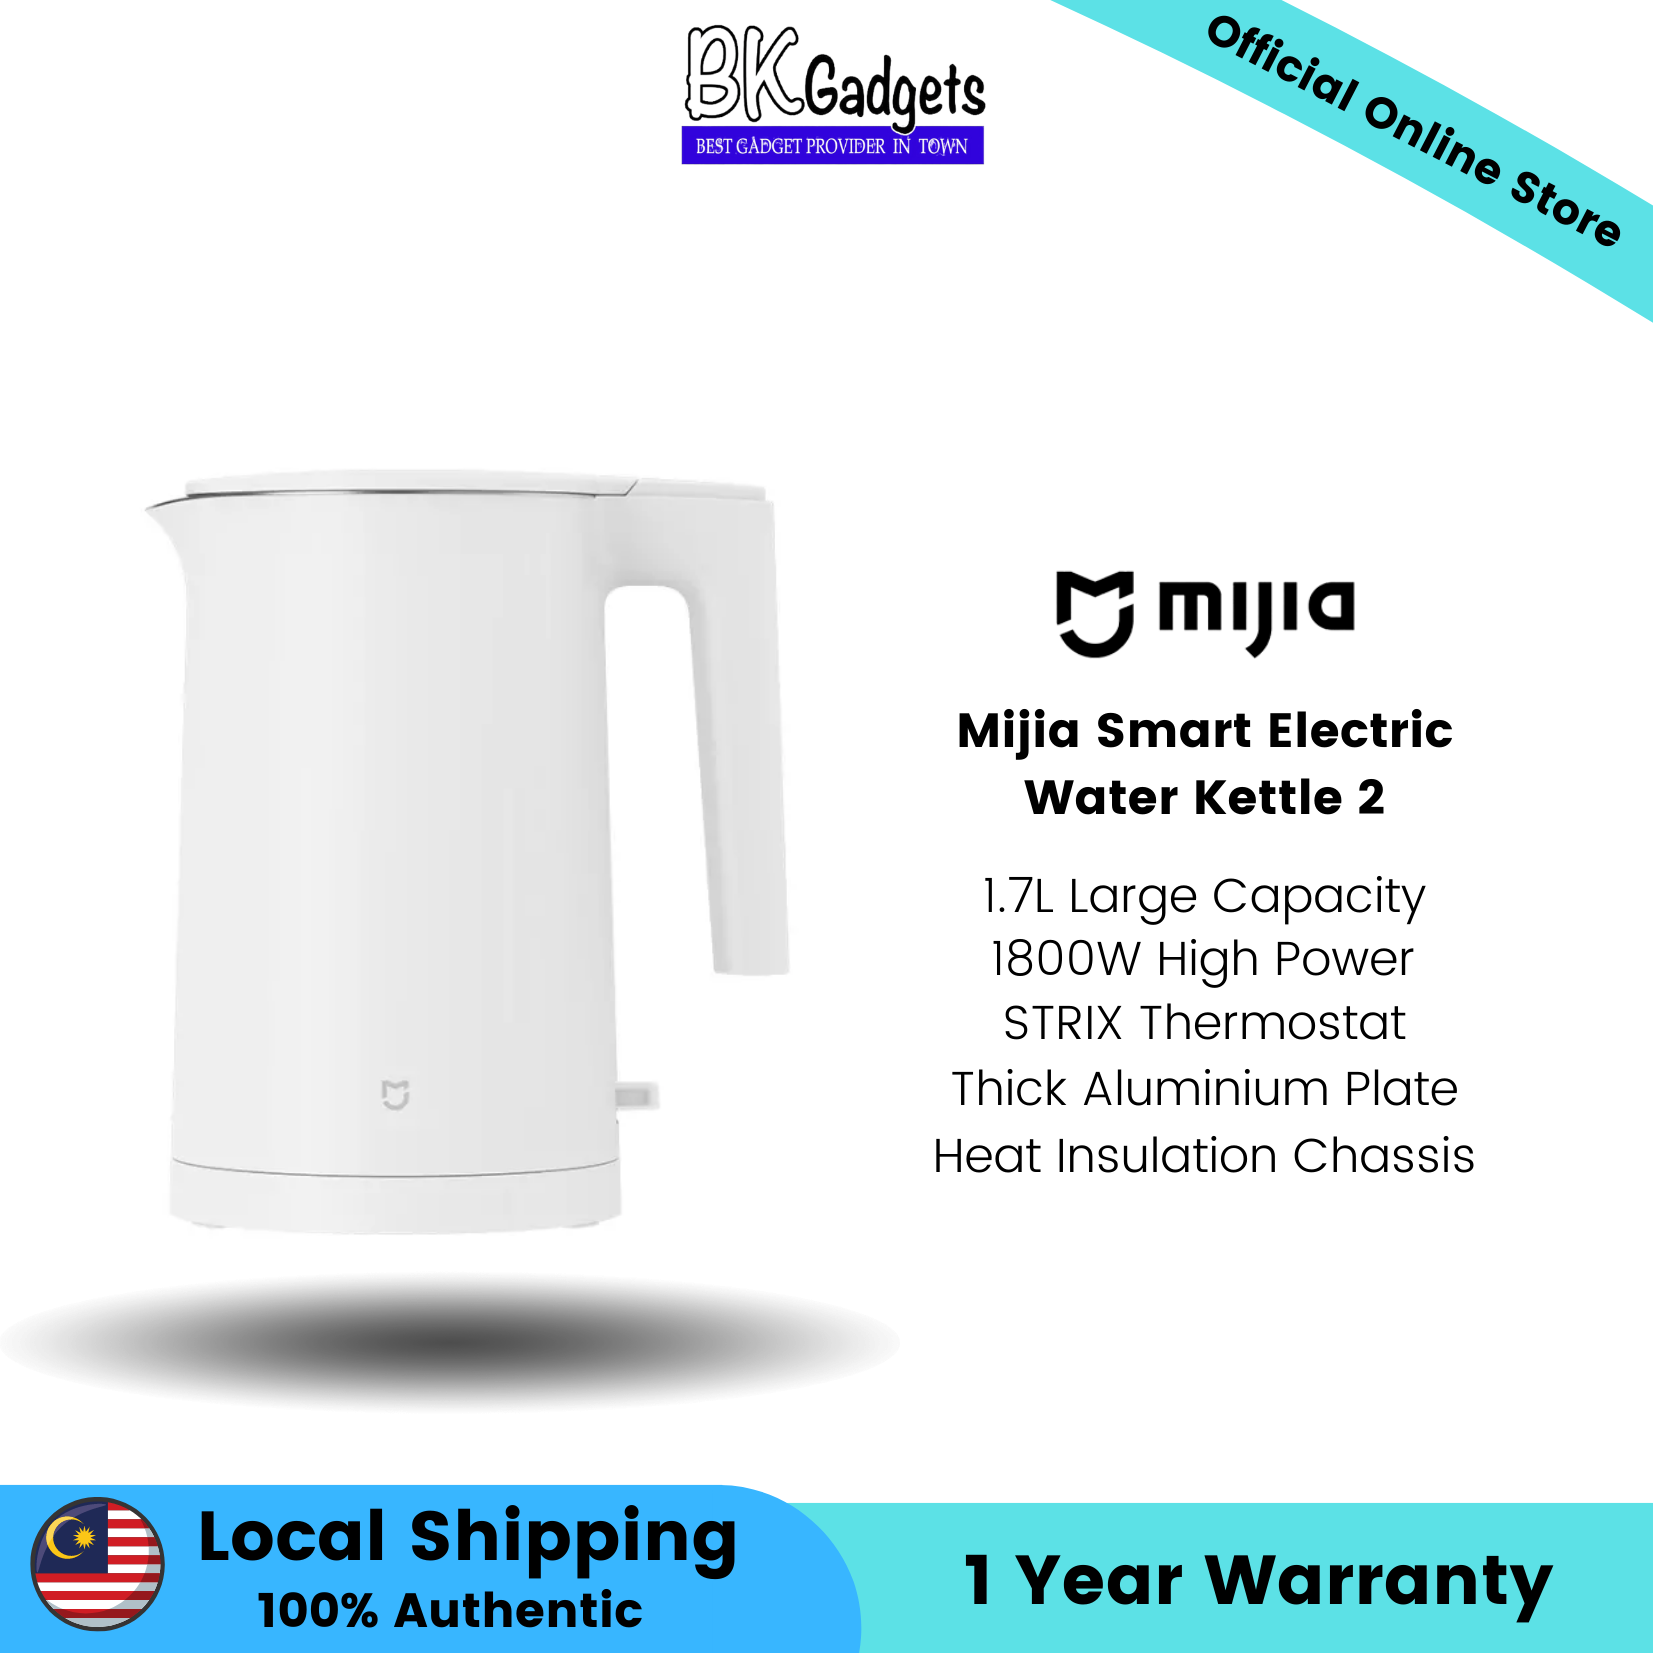 Mijia Smart Electric Water Kettle 2 - 1.7L Large Capacity 1800W High Power STRIX Thermostat